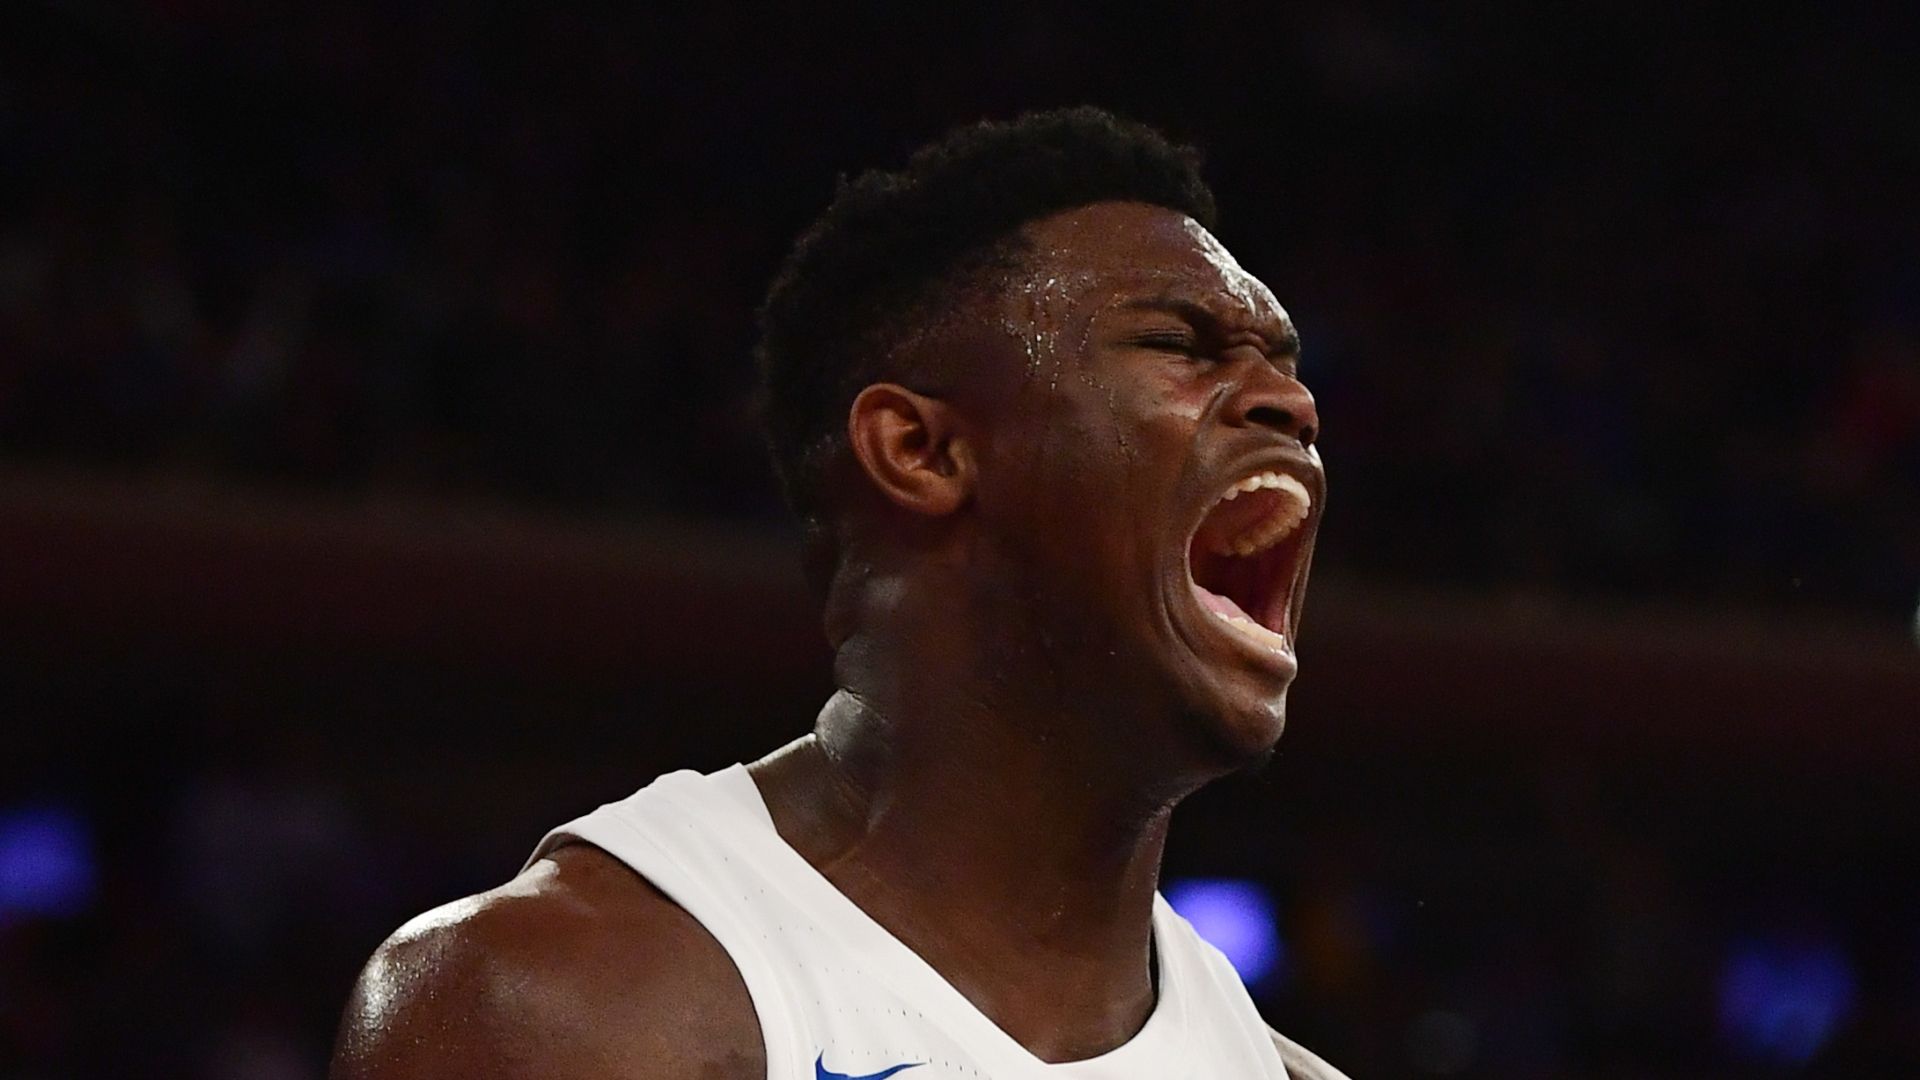 Duke Blue Devils remain No. 1 in AP Top 25 poll; Kentucky Wildcats rise to 13th